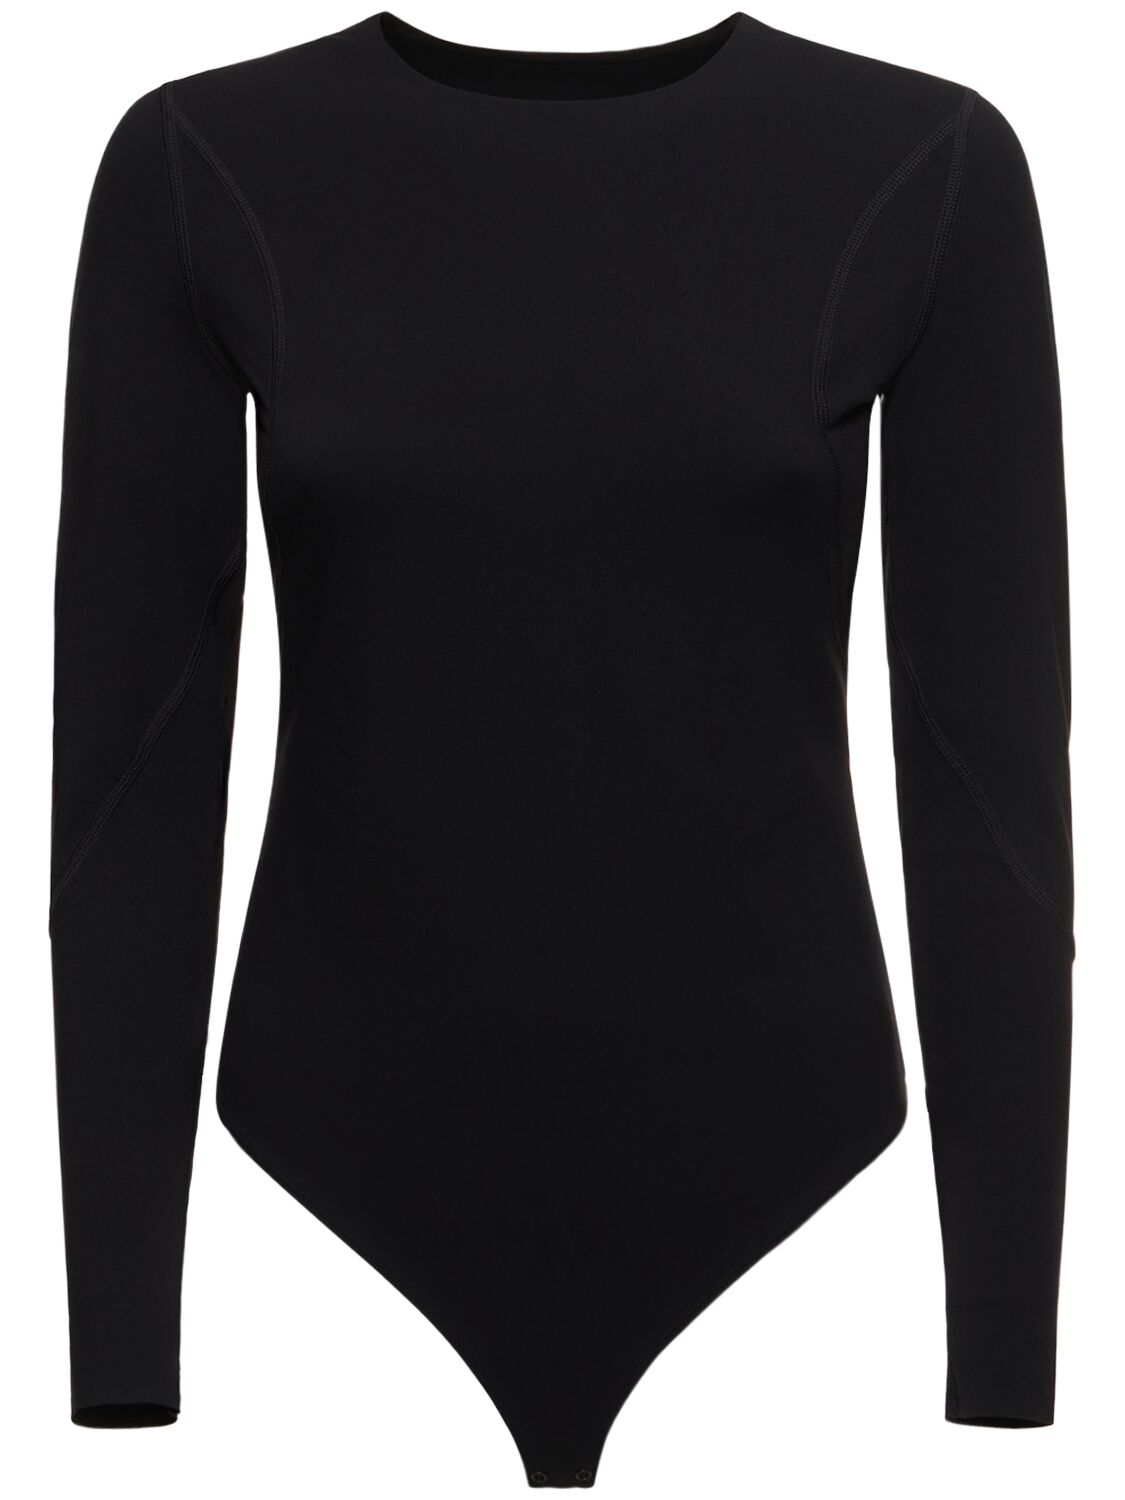 Buenos Aires String Body Long Sleeve